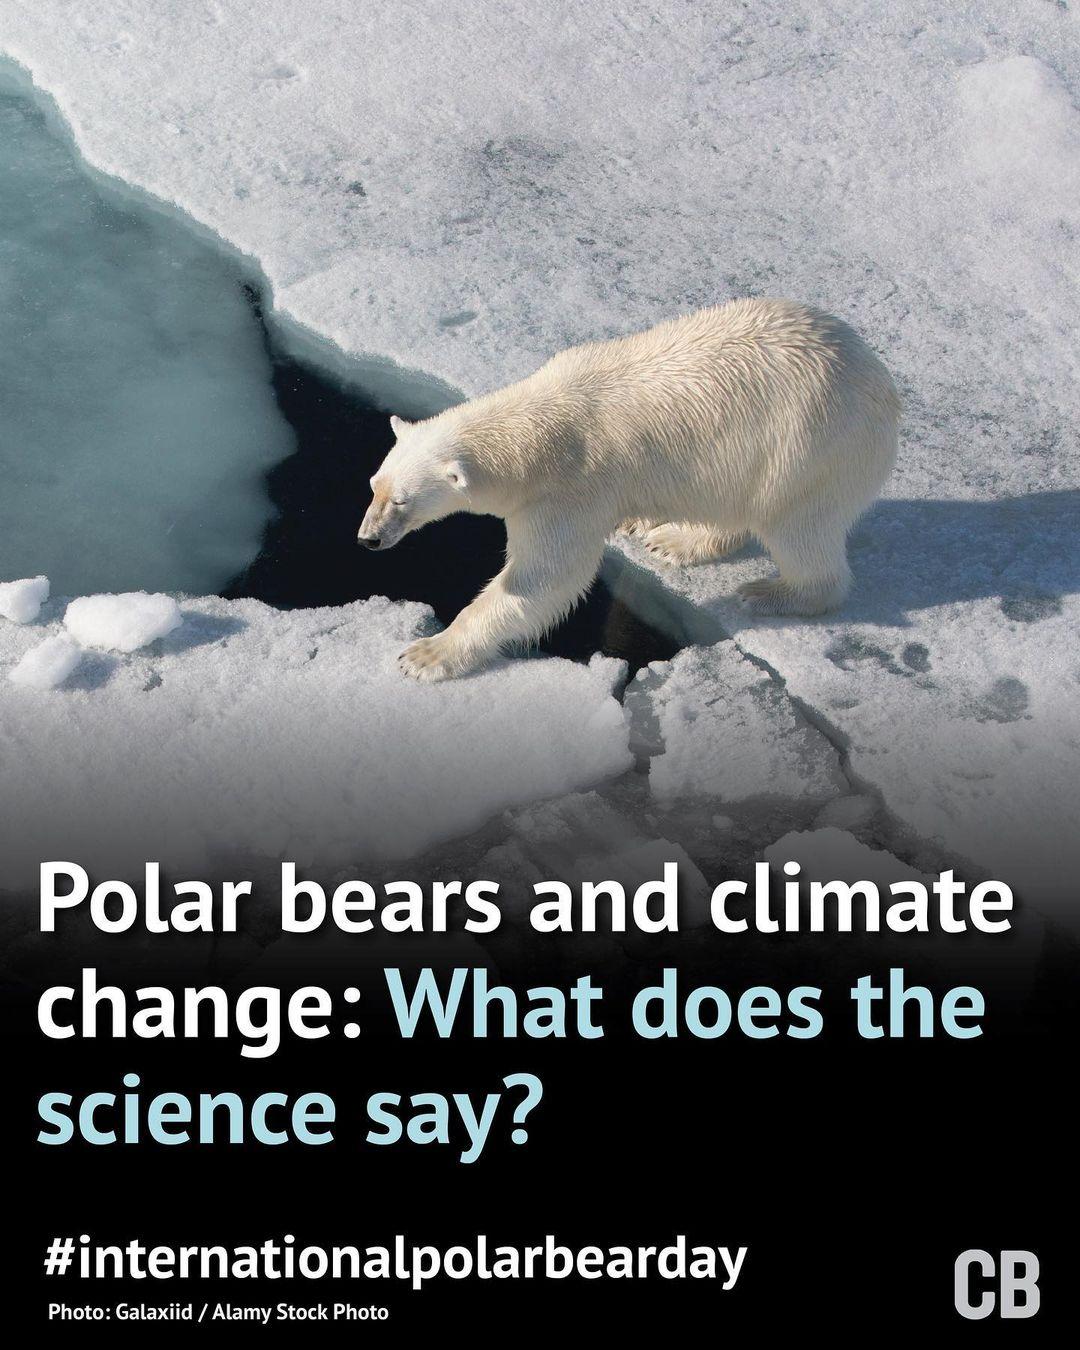 class="content__text"
                        On  #InternationalPolarBearDay, take a look at Carbon Brief's interactive, exploring how the iconic species is affected by climate change.

Swipe right for more ➡️

📲 Link in bio

 #internationalpolarbearday #polarbear #climatechange 
 